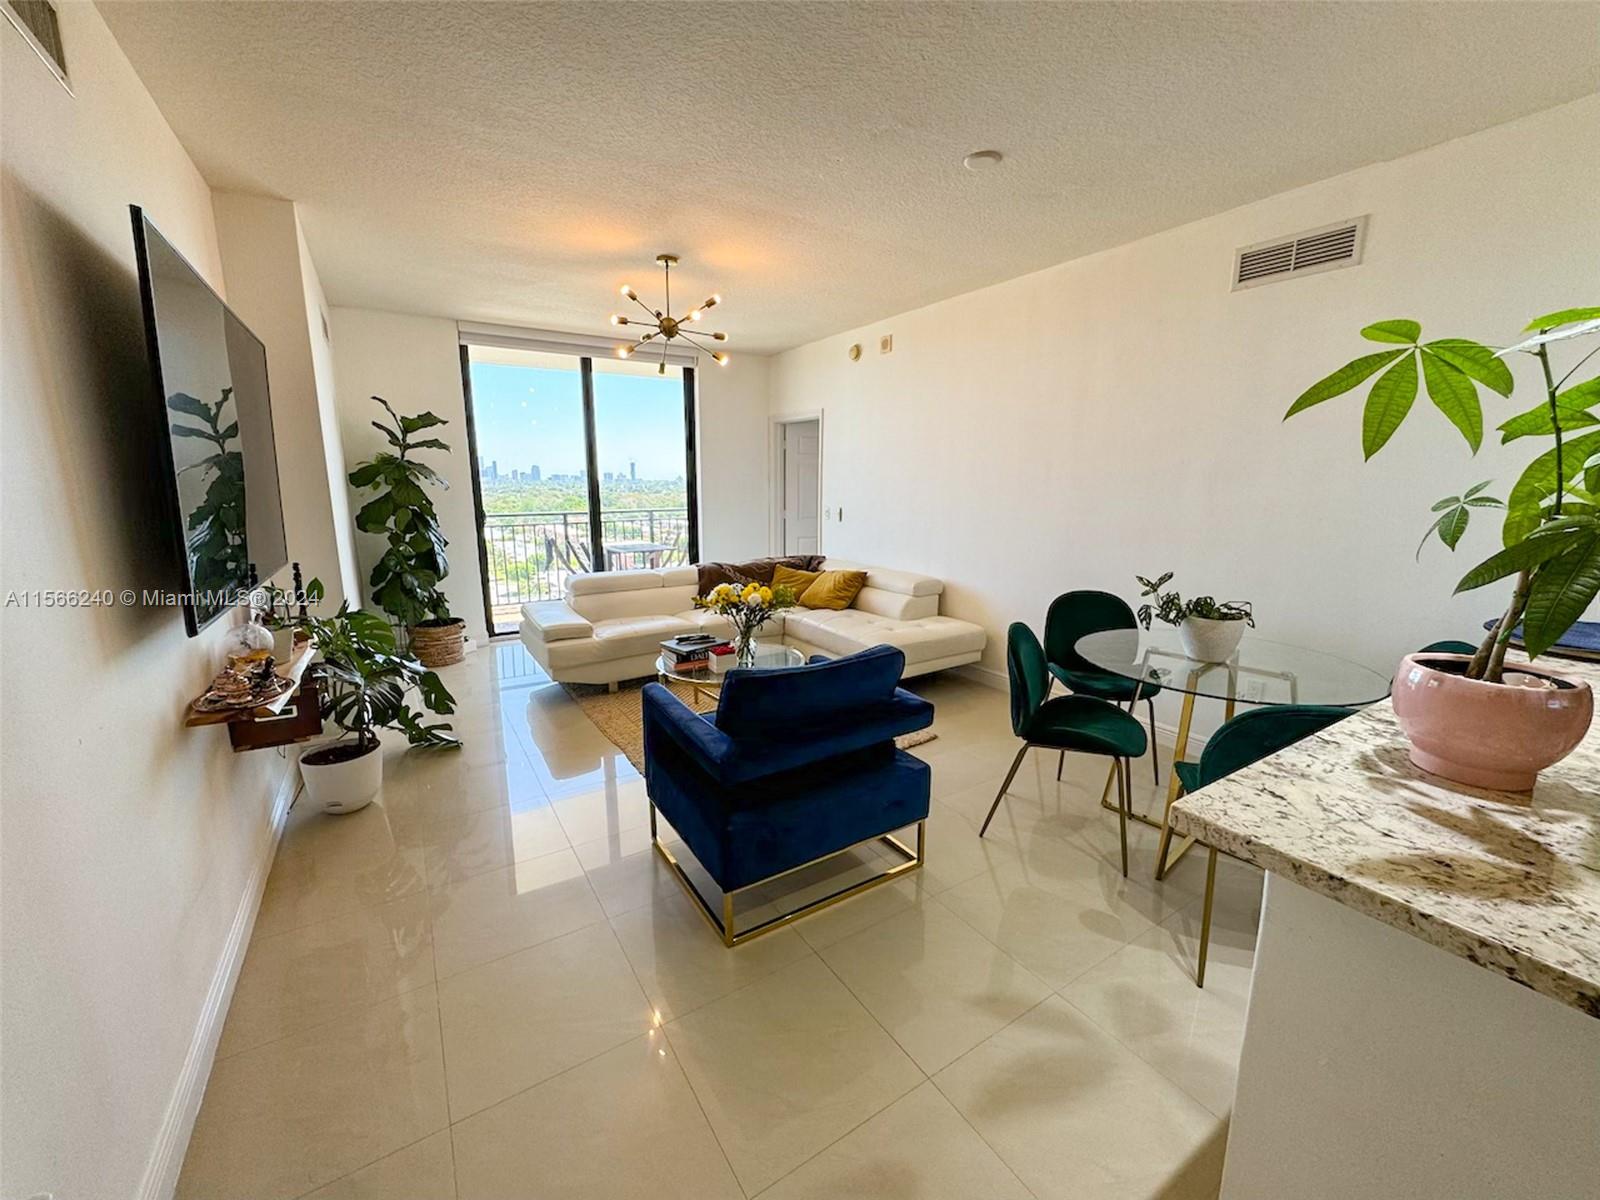 This is one of the best units in Puerta de Palmas at Coral Gables. It has two bedrooms and two bathrooms with spectacular city views. comes with 2 parking spaces and a storage unit. The kitchen features stainless steel appliances, wood cabinetry, and granite countertops. The bathrooms are fully renovated.  Custom-made closets, washer and dryer. The building offers many amenities, including 24-hour security, valet parking, a gym, a pool, and more.